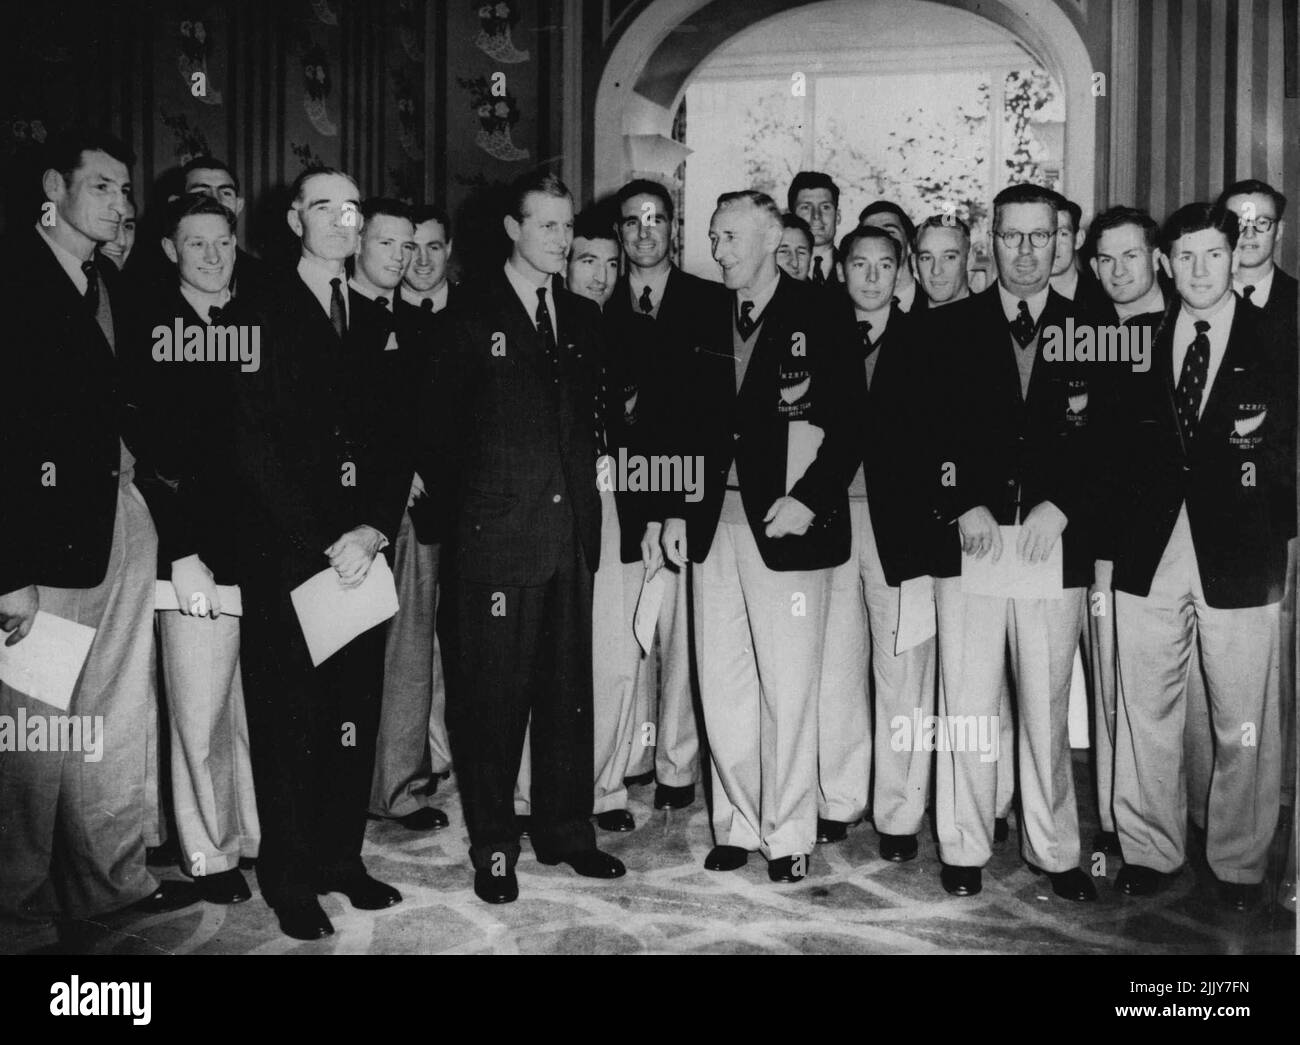 Duke Lunches With The All Blacks -- The Duke of Edinburgh with members of the New Zealand touring rugby team (All Blacks), is seen (third from left, front row), at the Savoy Hotel, London, today November 3rd, when he attended a luncheon given for the New Zealand players by the British Sportsman's Club. November 03, 1953. (Photo by Associated Press Photo). Stock Photo